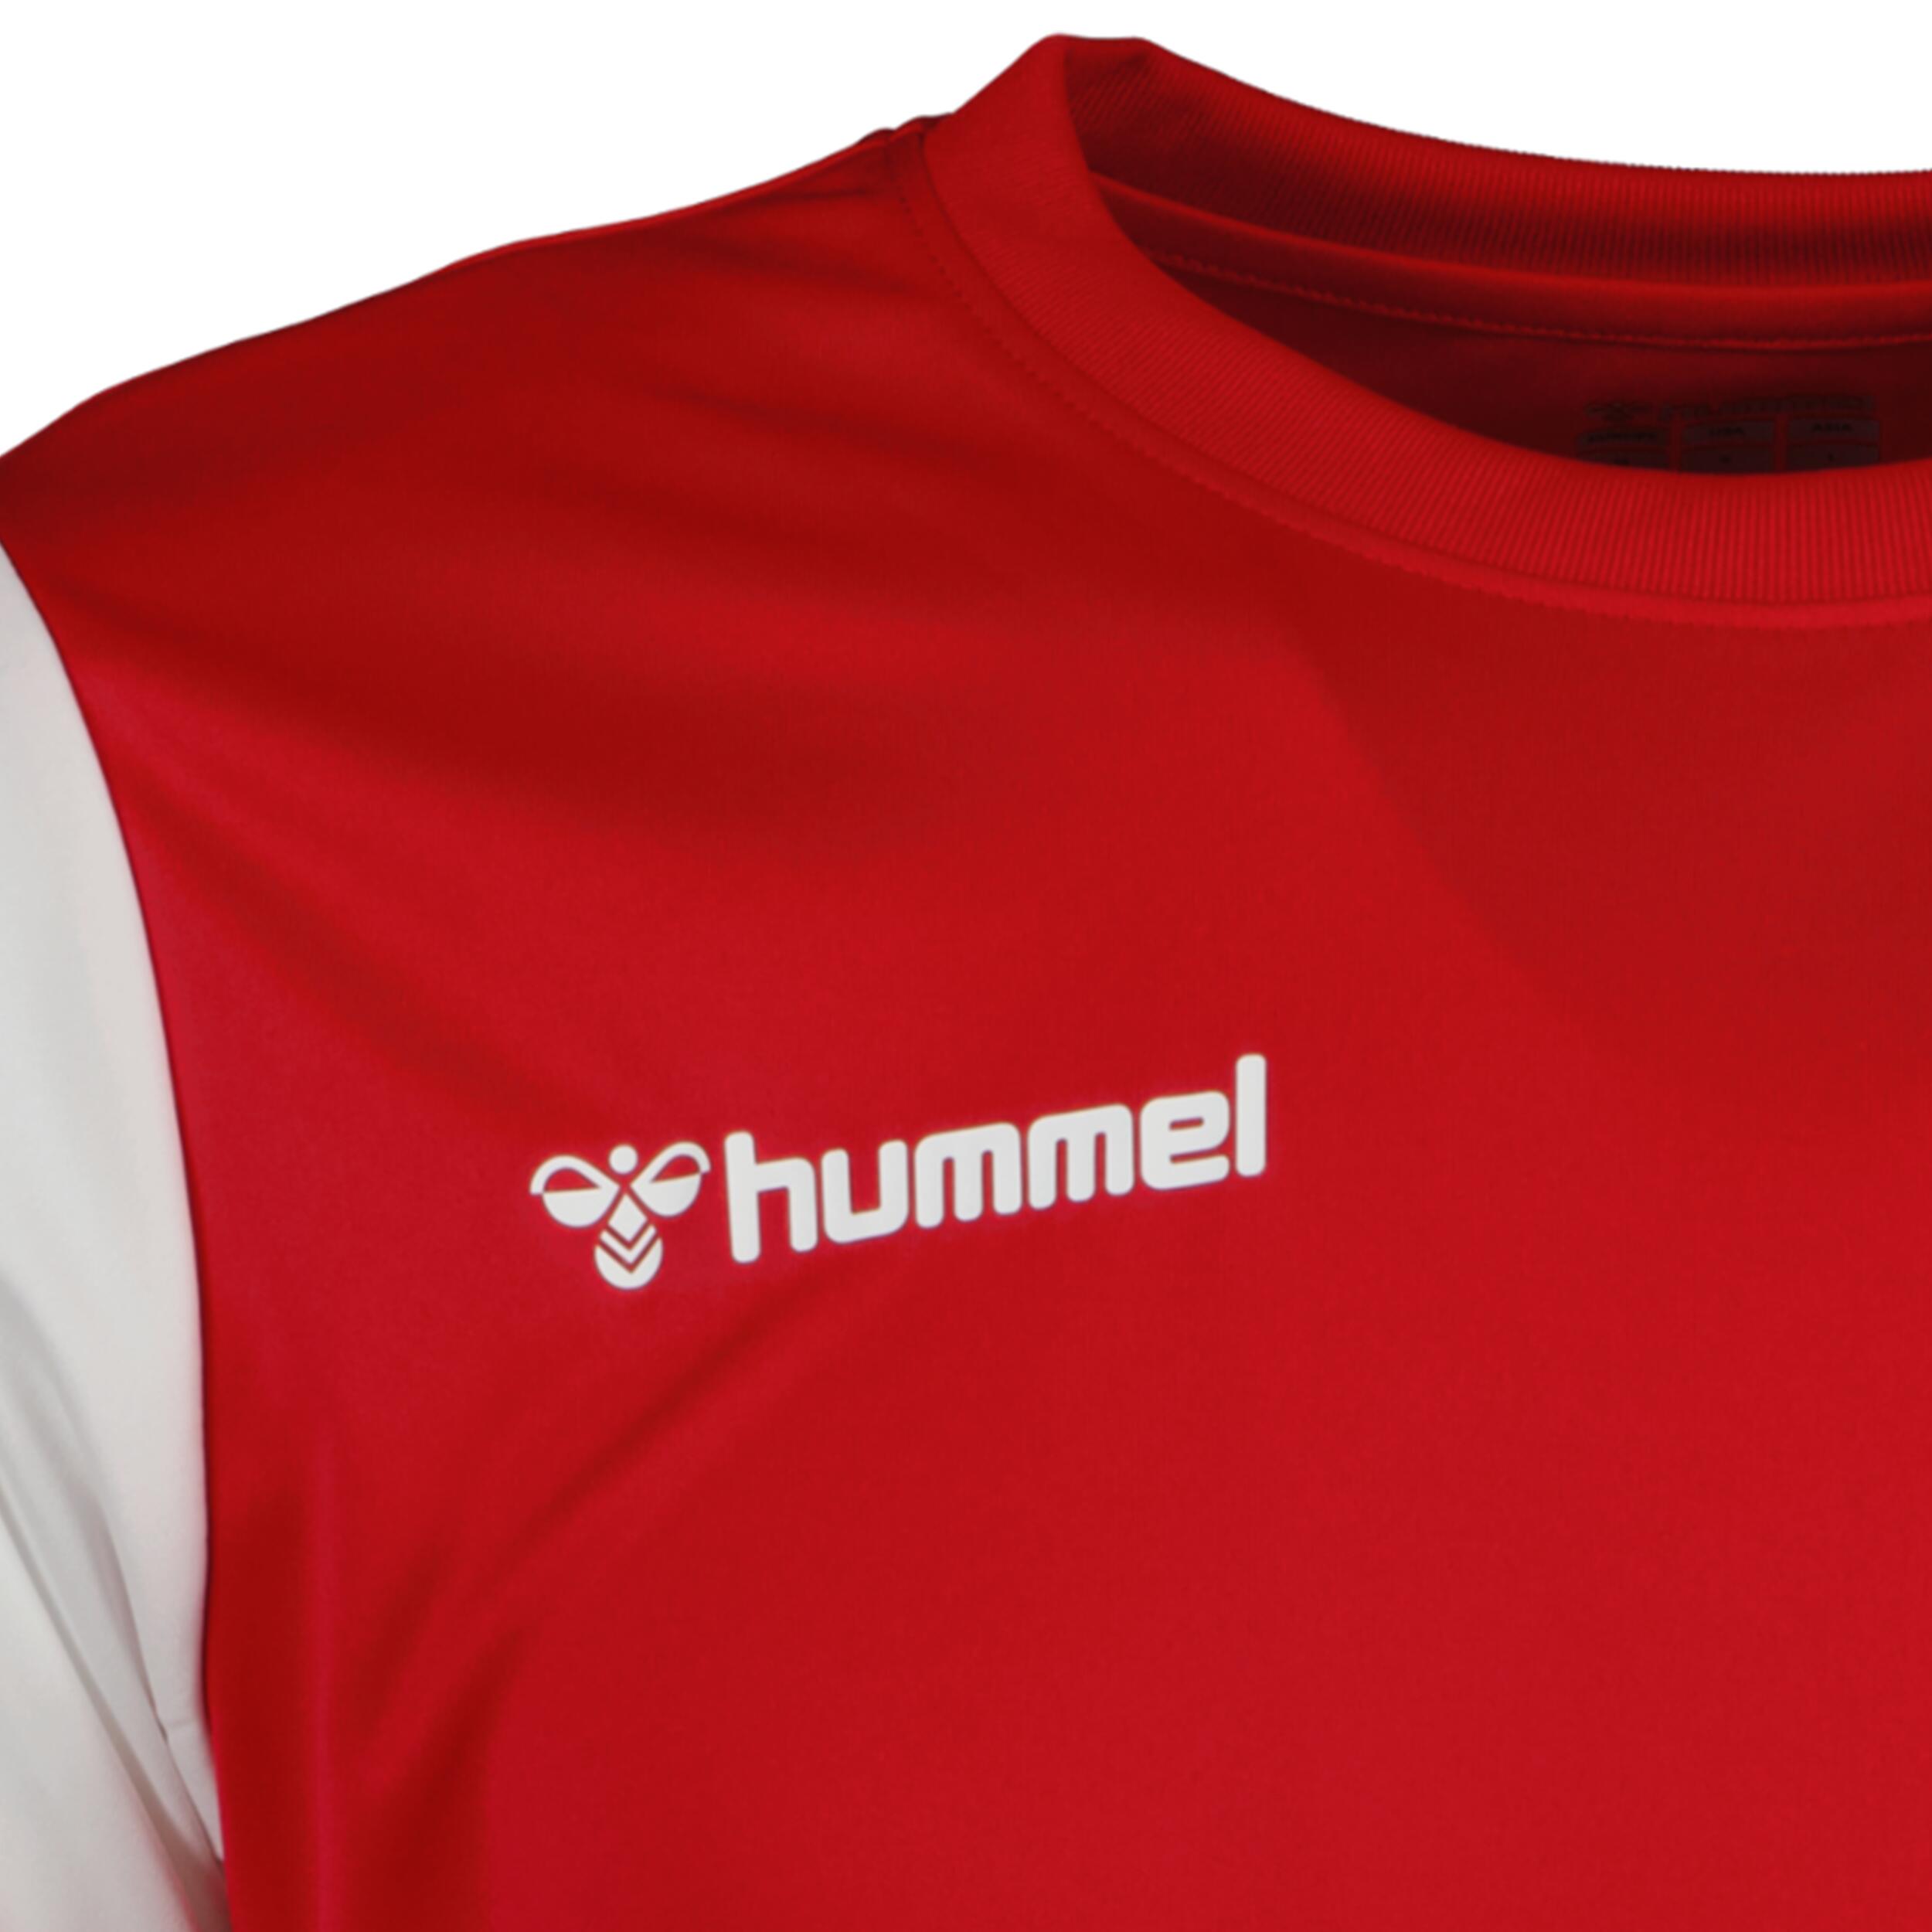 Match jersey for men, great for football, in red/white 3/3